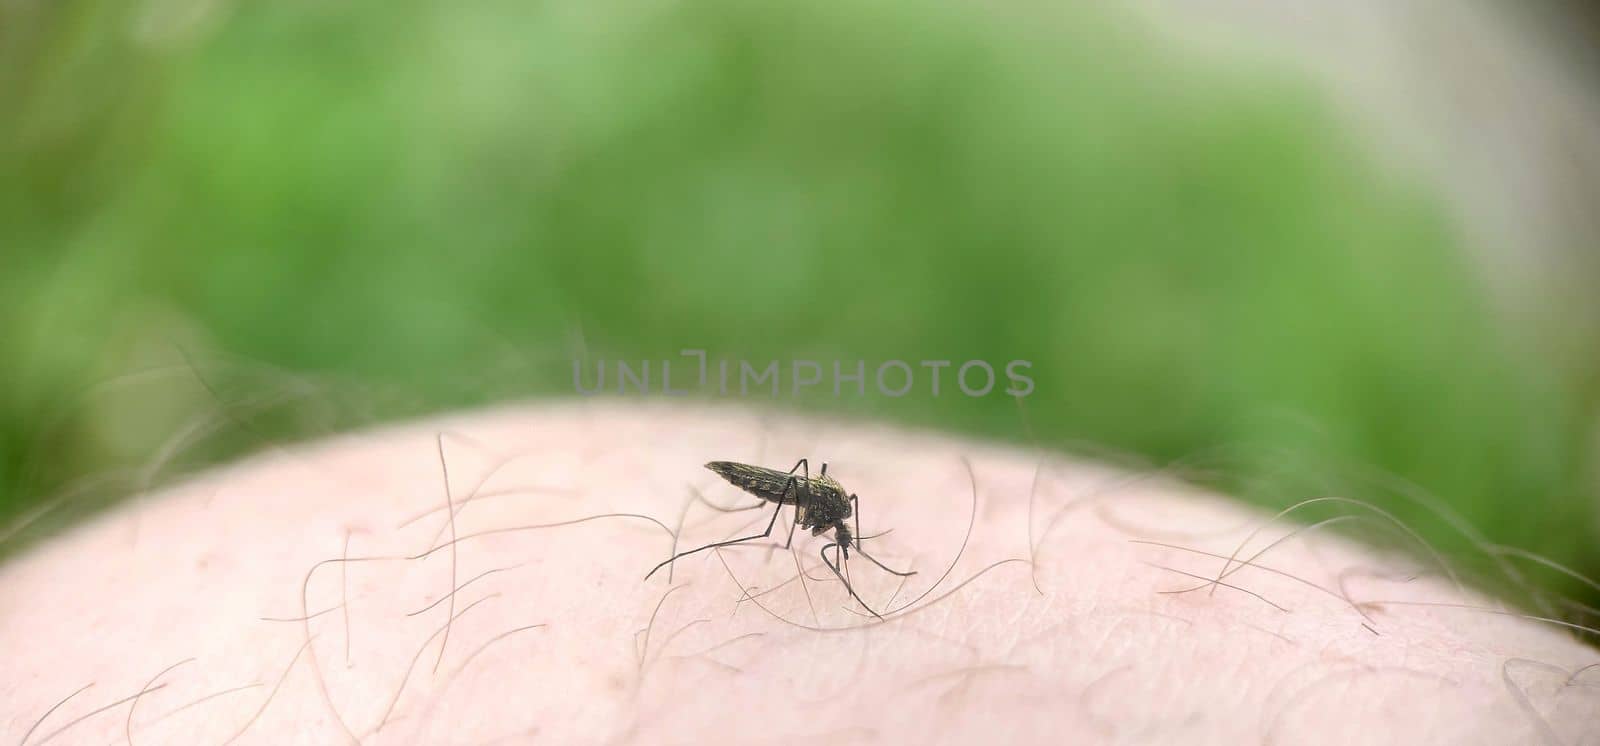 Striped mosquito on a human leg drinking blood by Mastak80